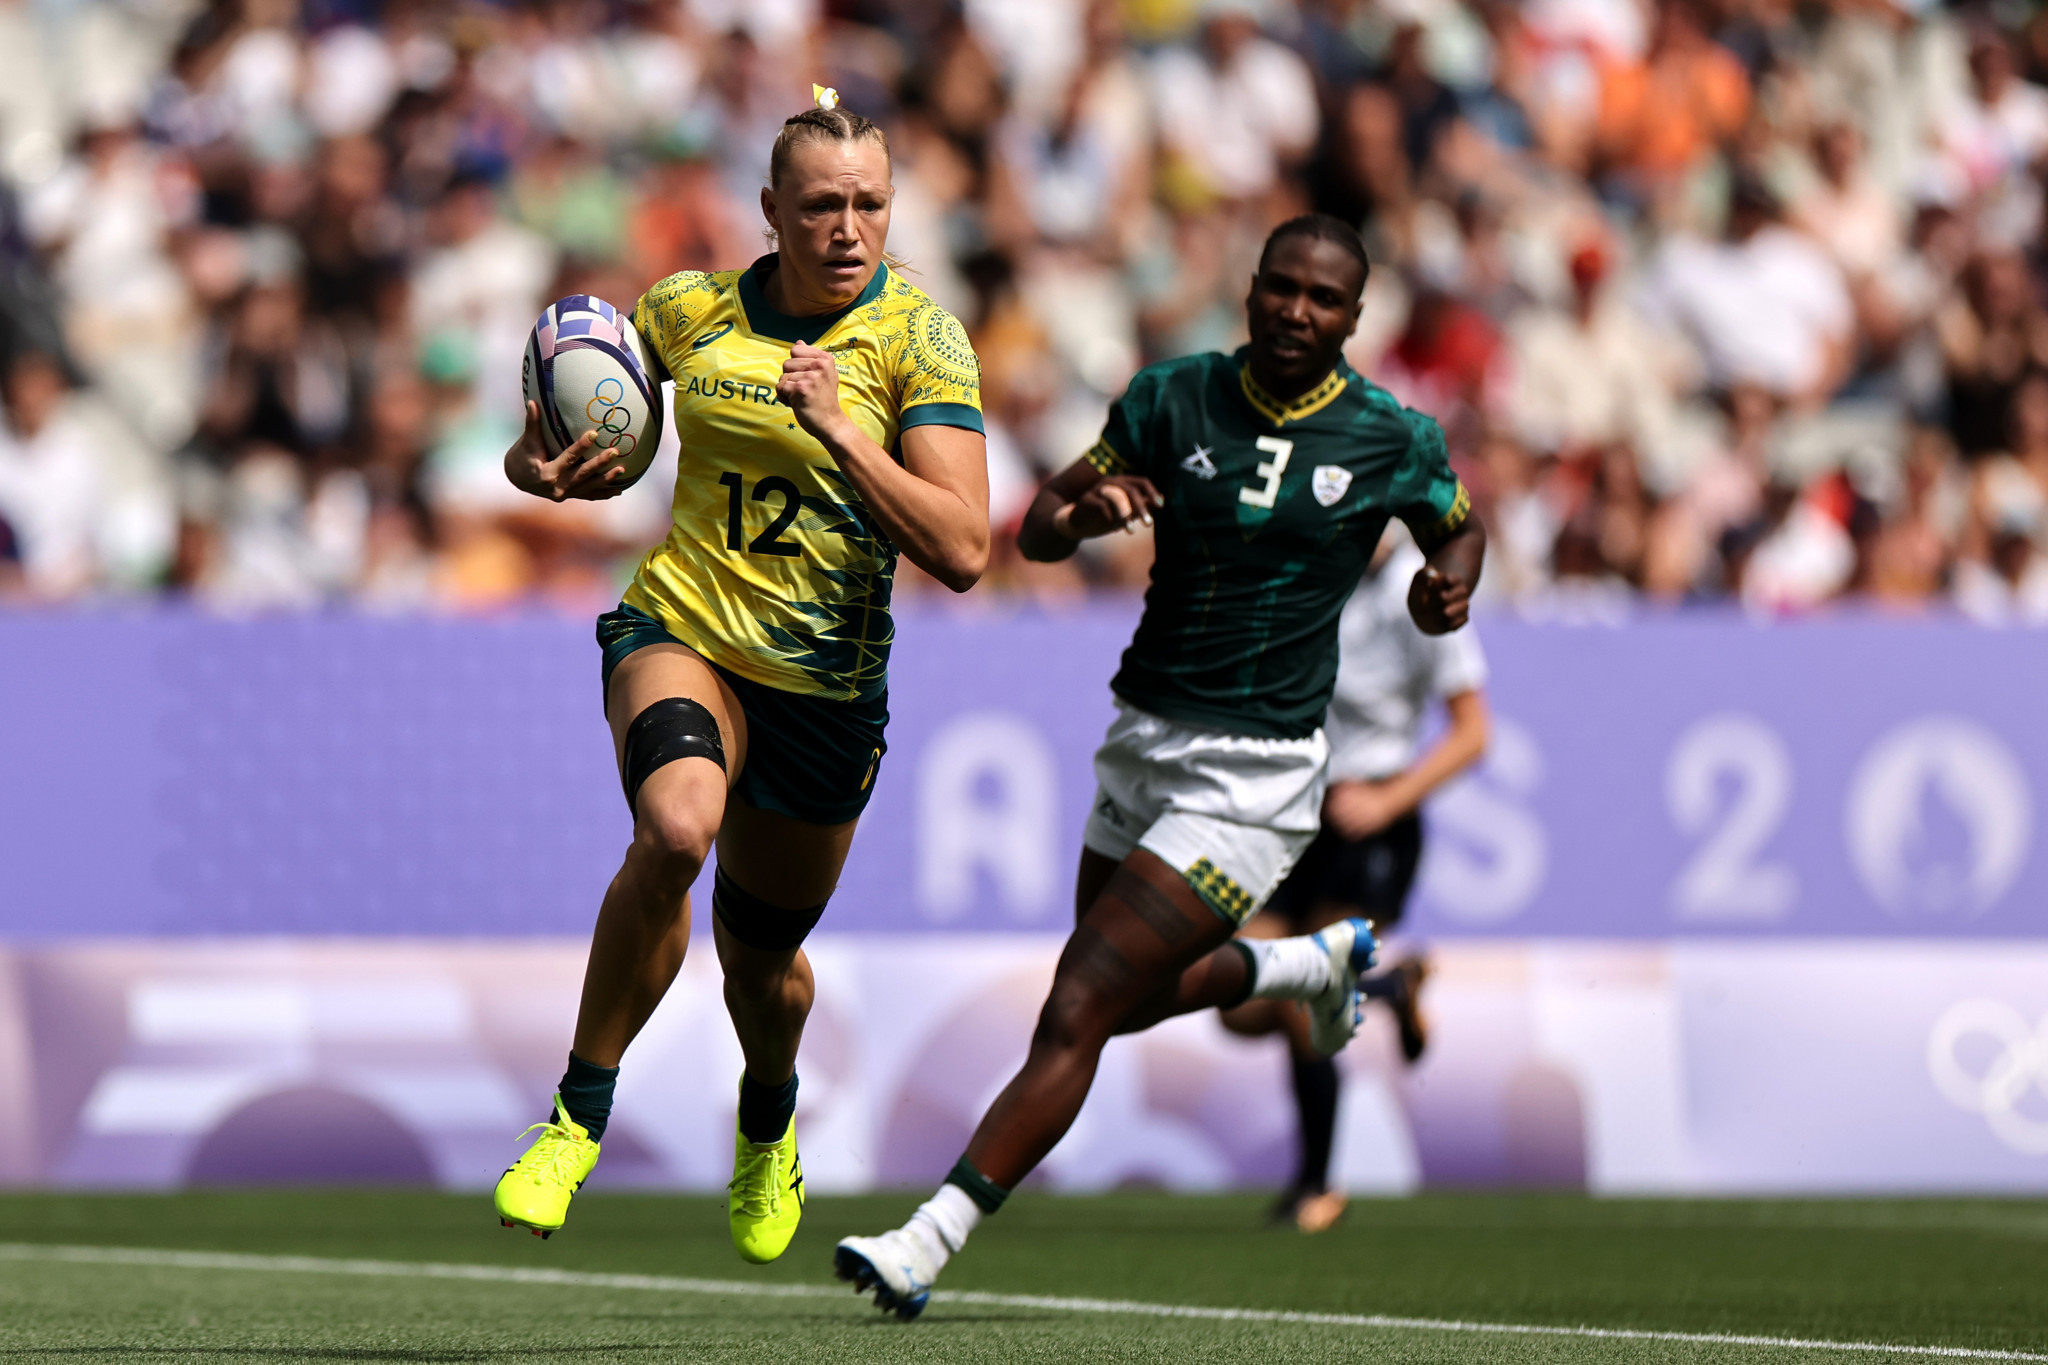 Maddison Levi helped Australia to the semi-finals in the rugby sevens. GETTY IMAGES